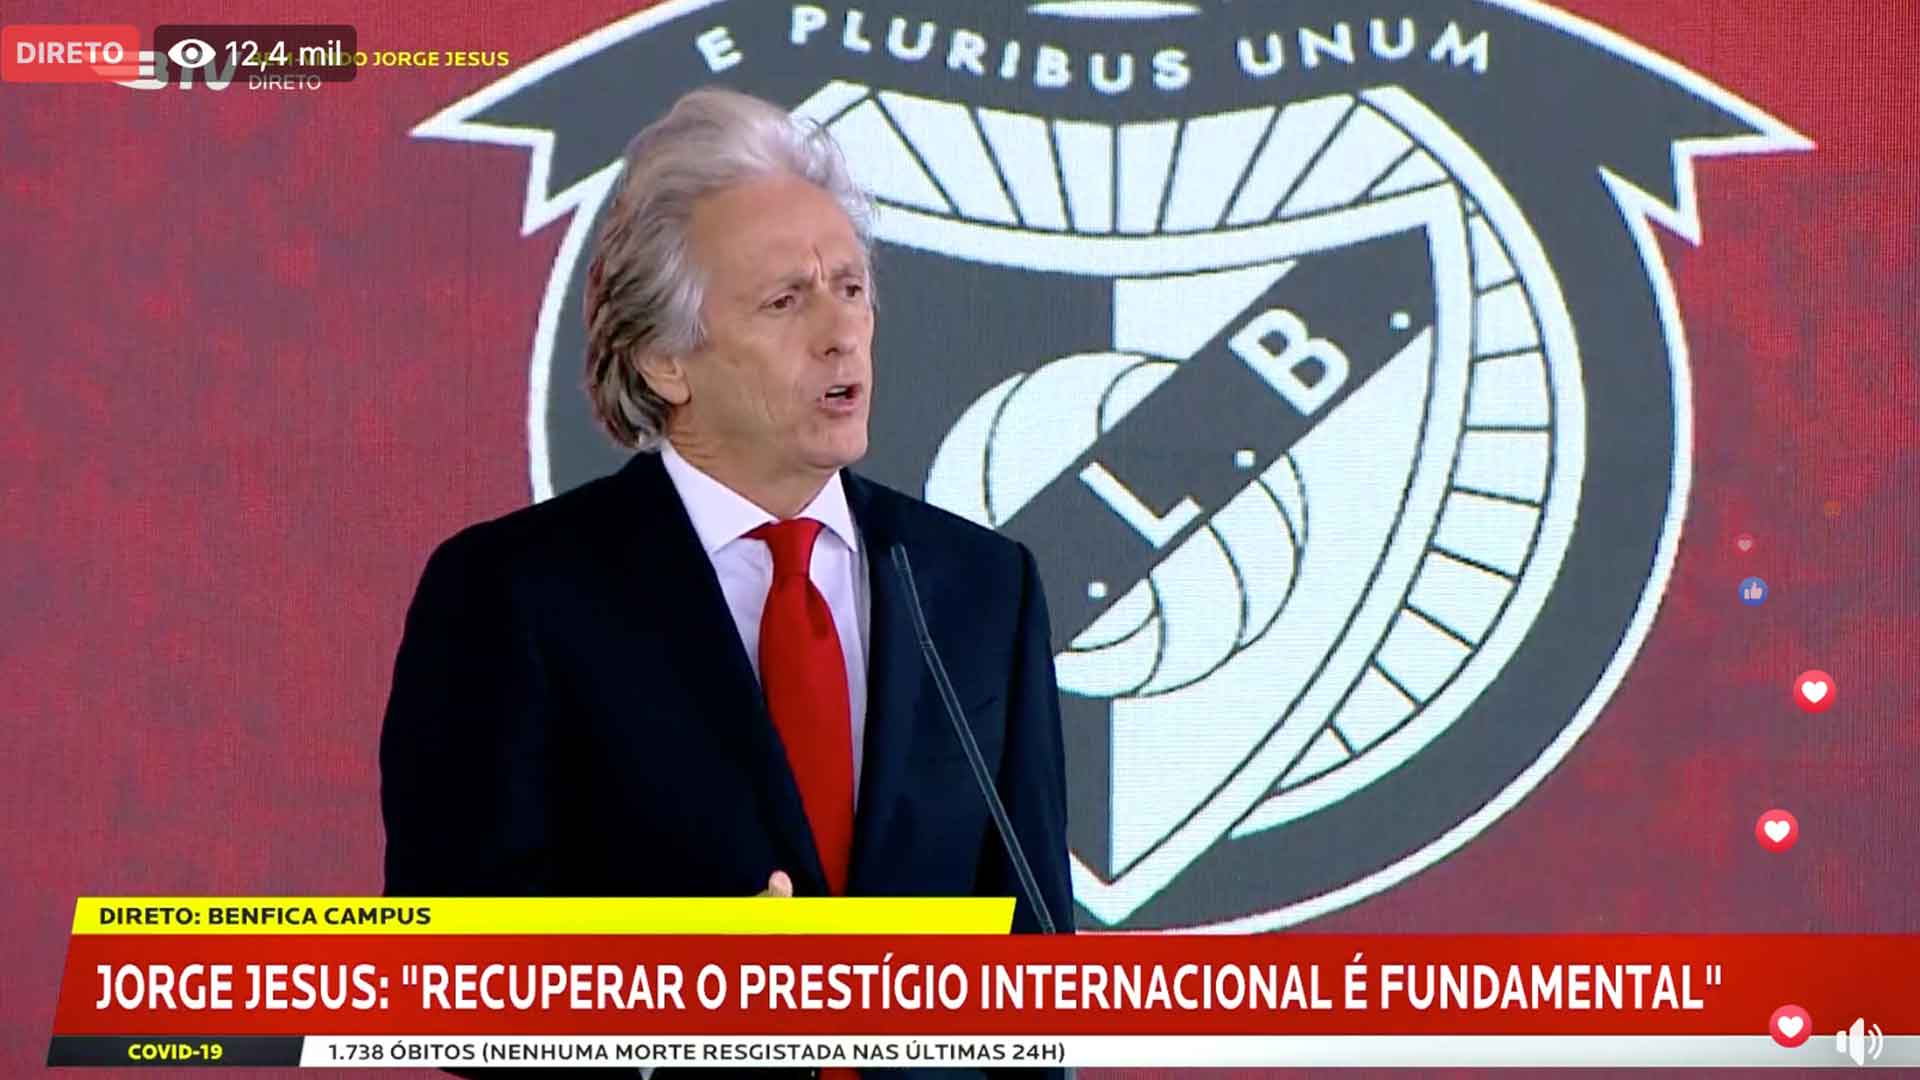 Jorge Jesus: a lesson in communication